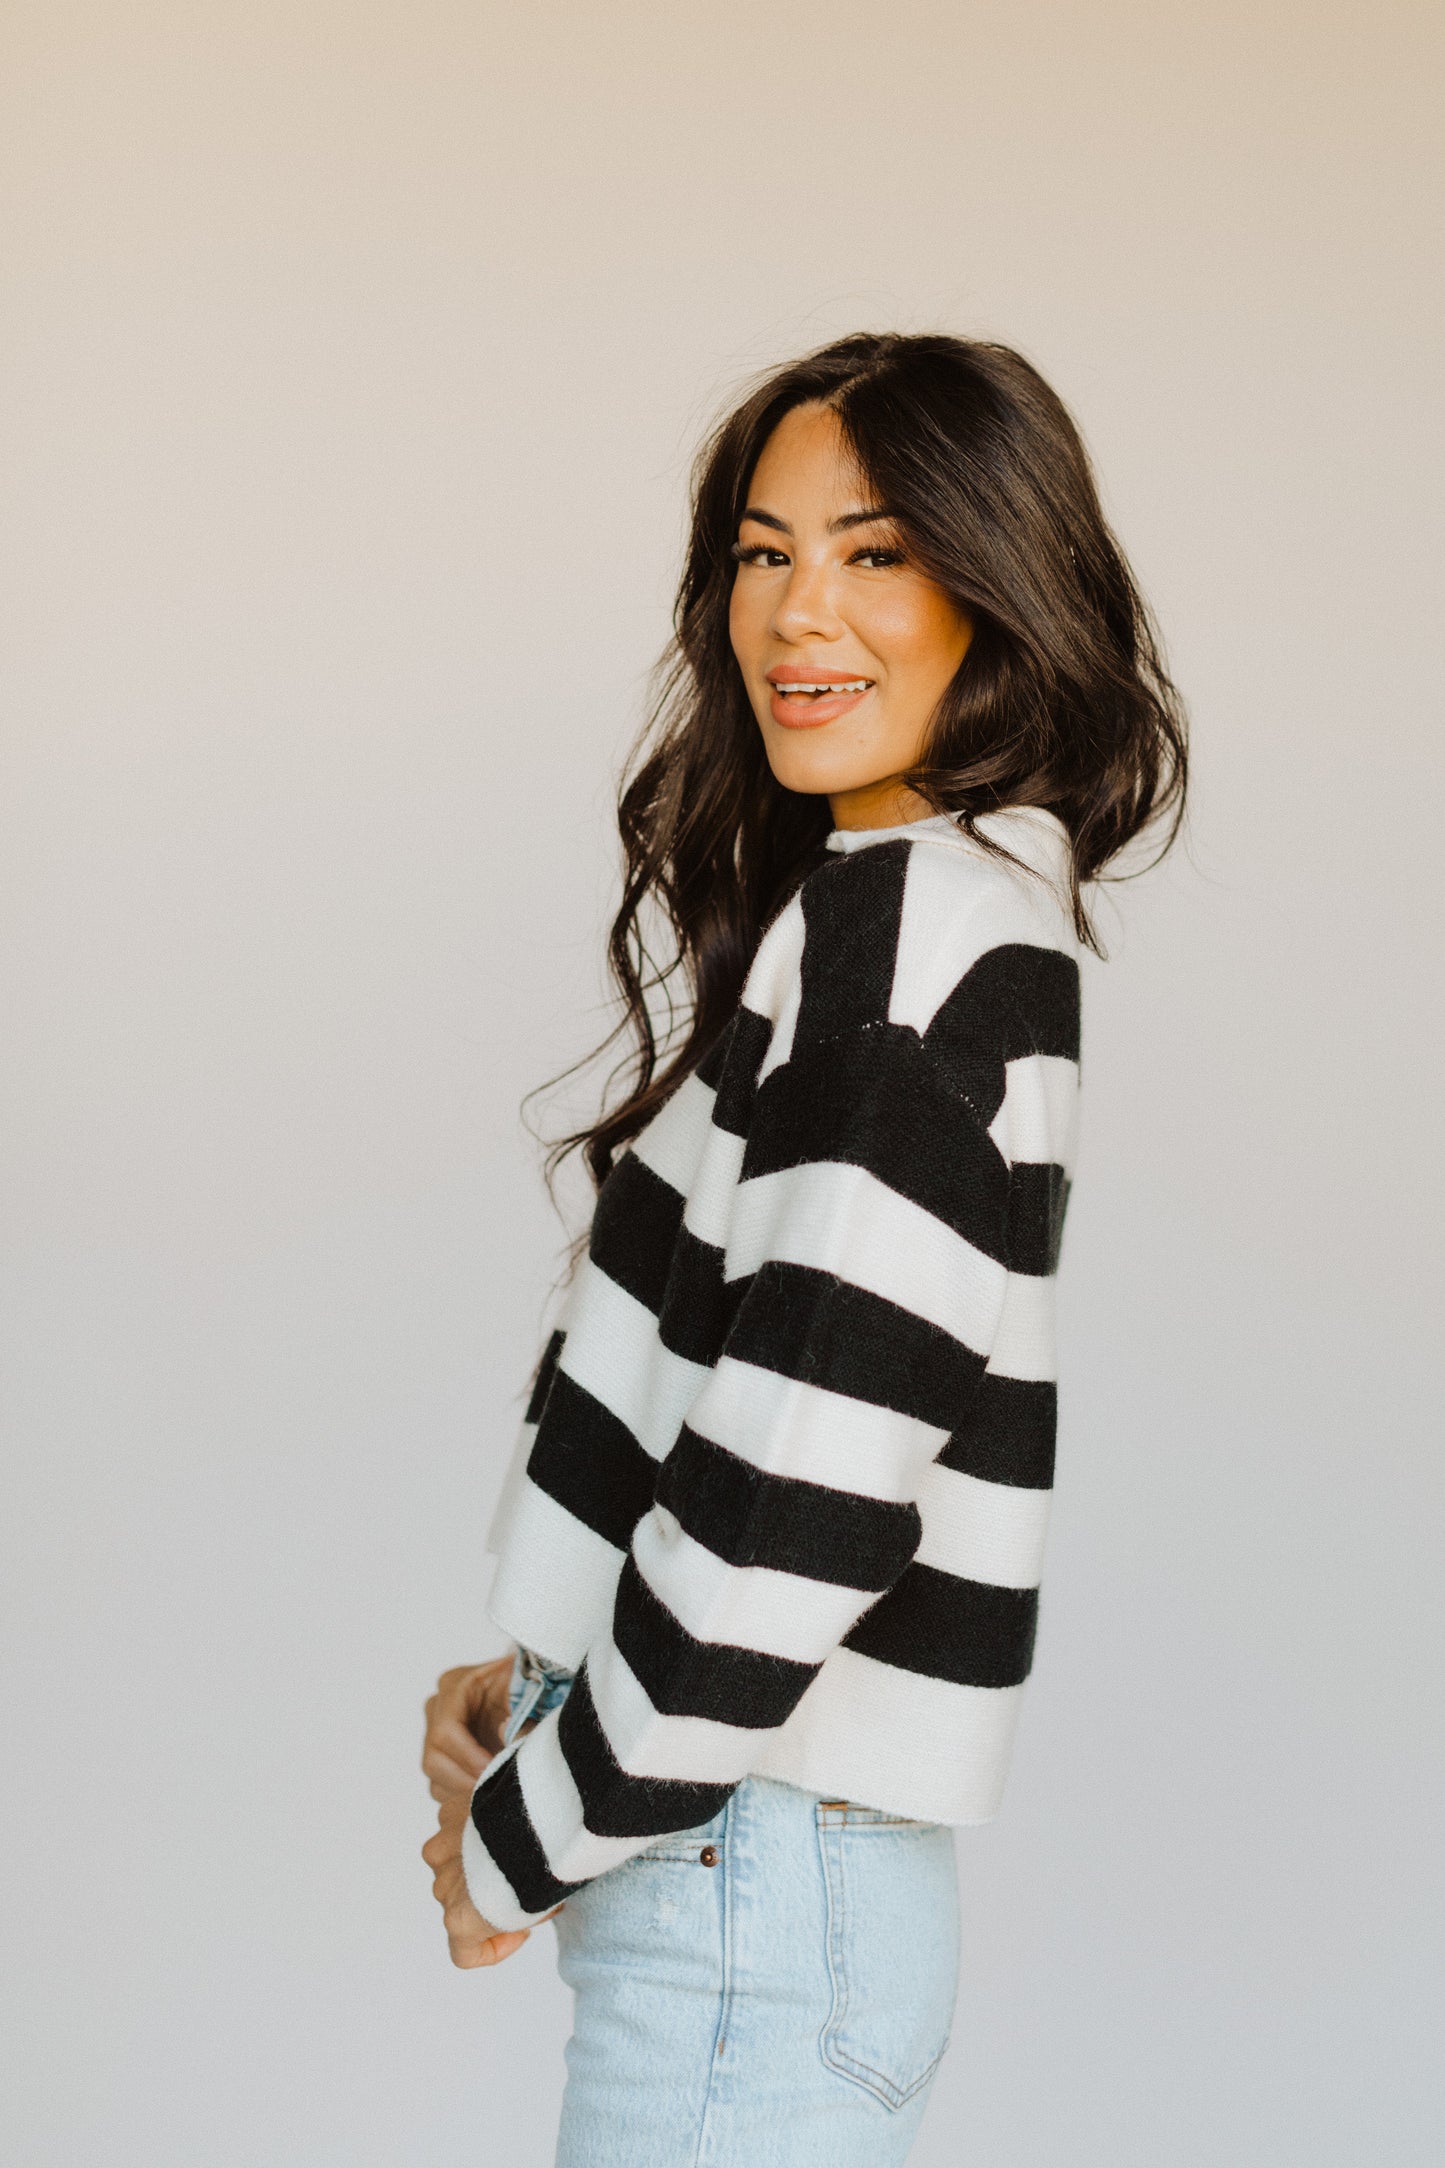 Be Bold Striped Top